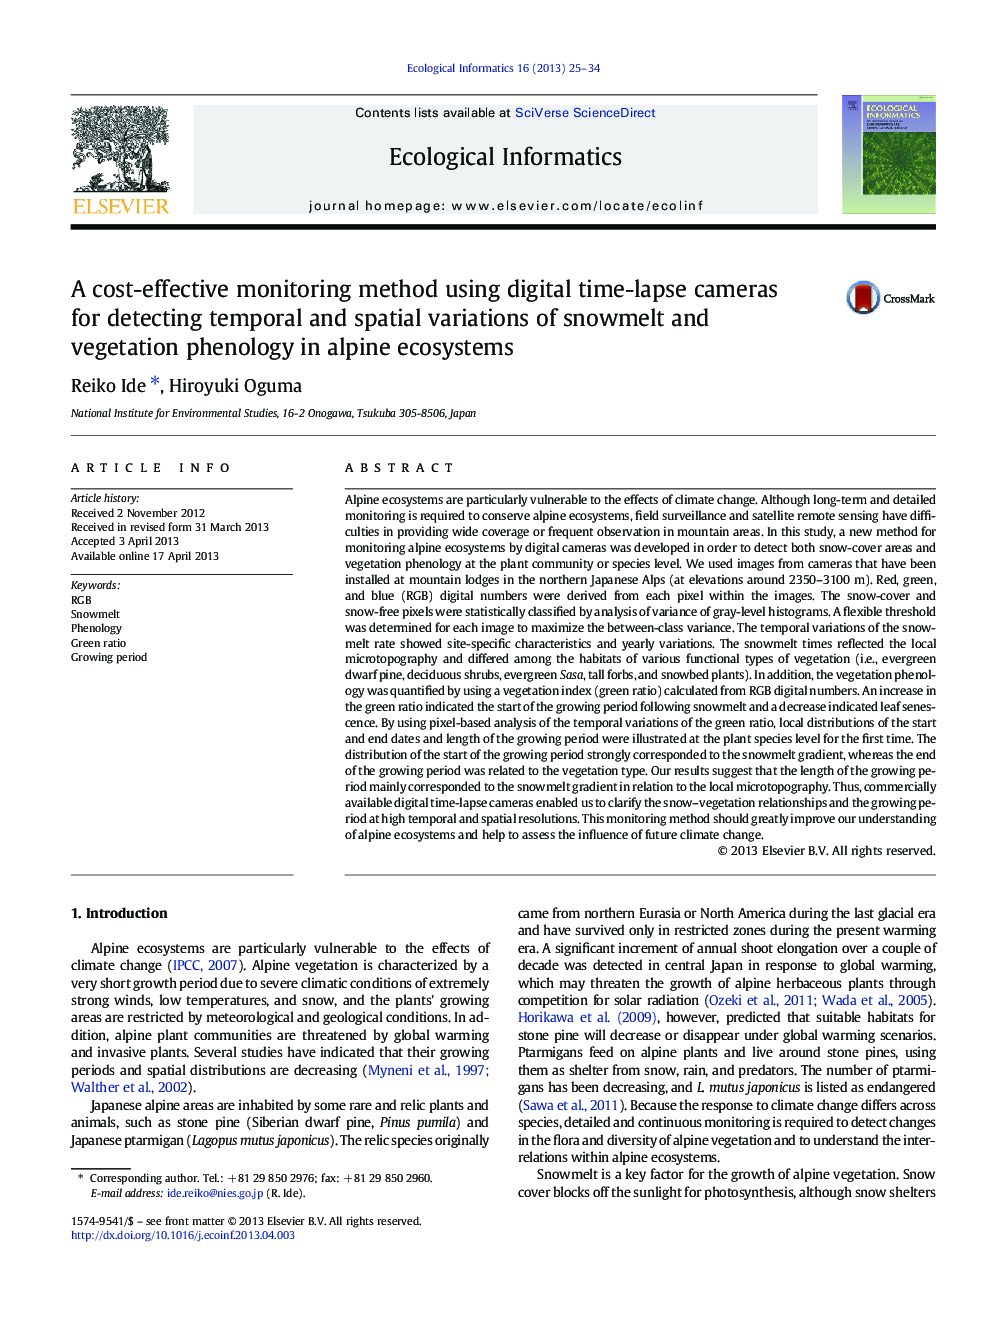 A cost-effective monitoring method using digital time-lapse cameras for detecting temporal and spatial variations of snowmelt and vegetation phenology in alpine ecosystems